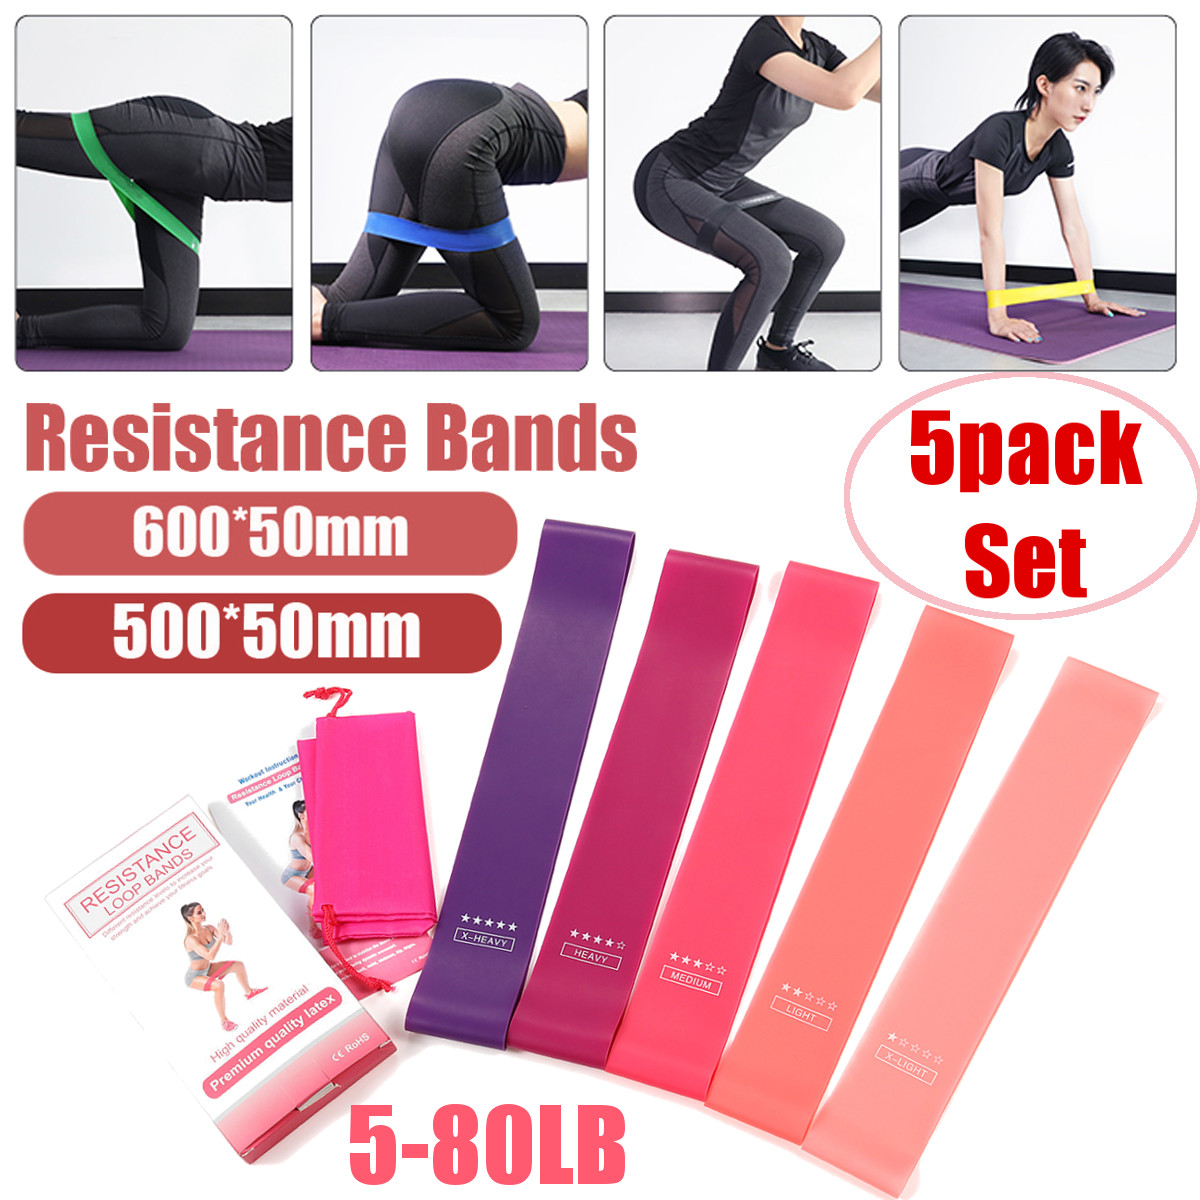 15pcs-Latex-Resistance-Bands-Strength-Training-Exercise-Fitness-Home-Yoga-60050mm-1678687-2